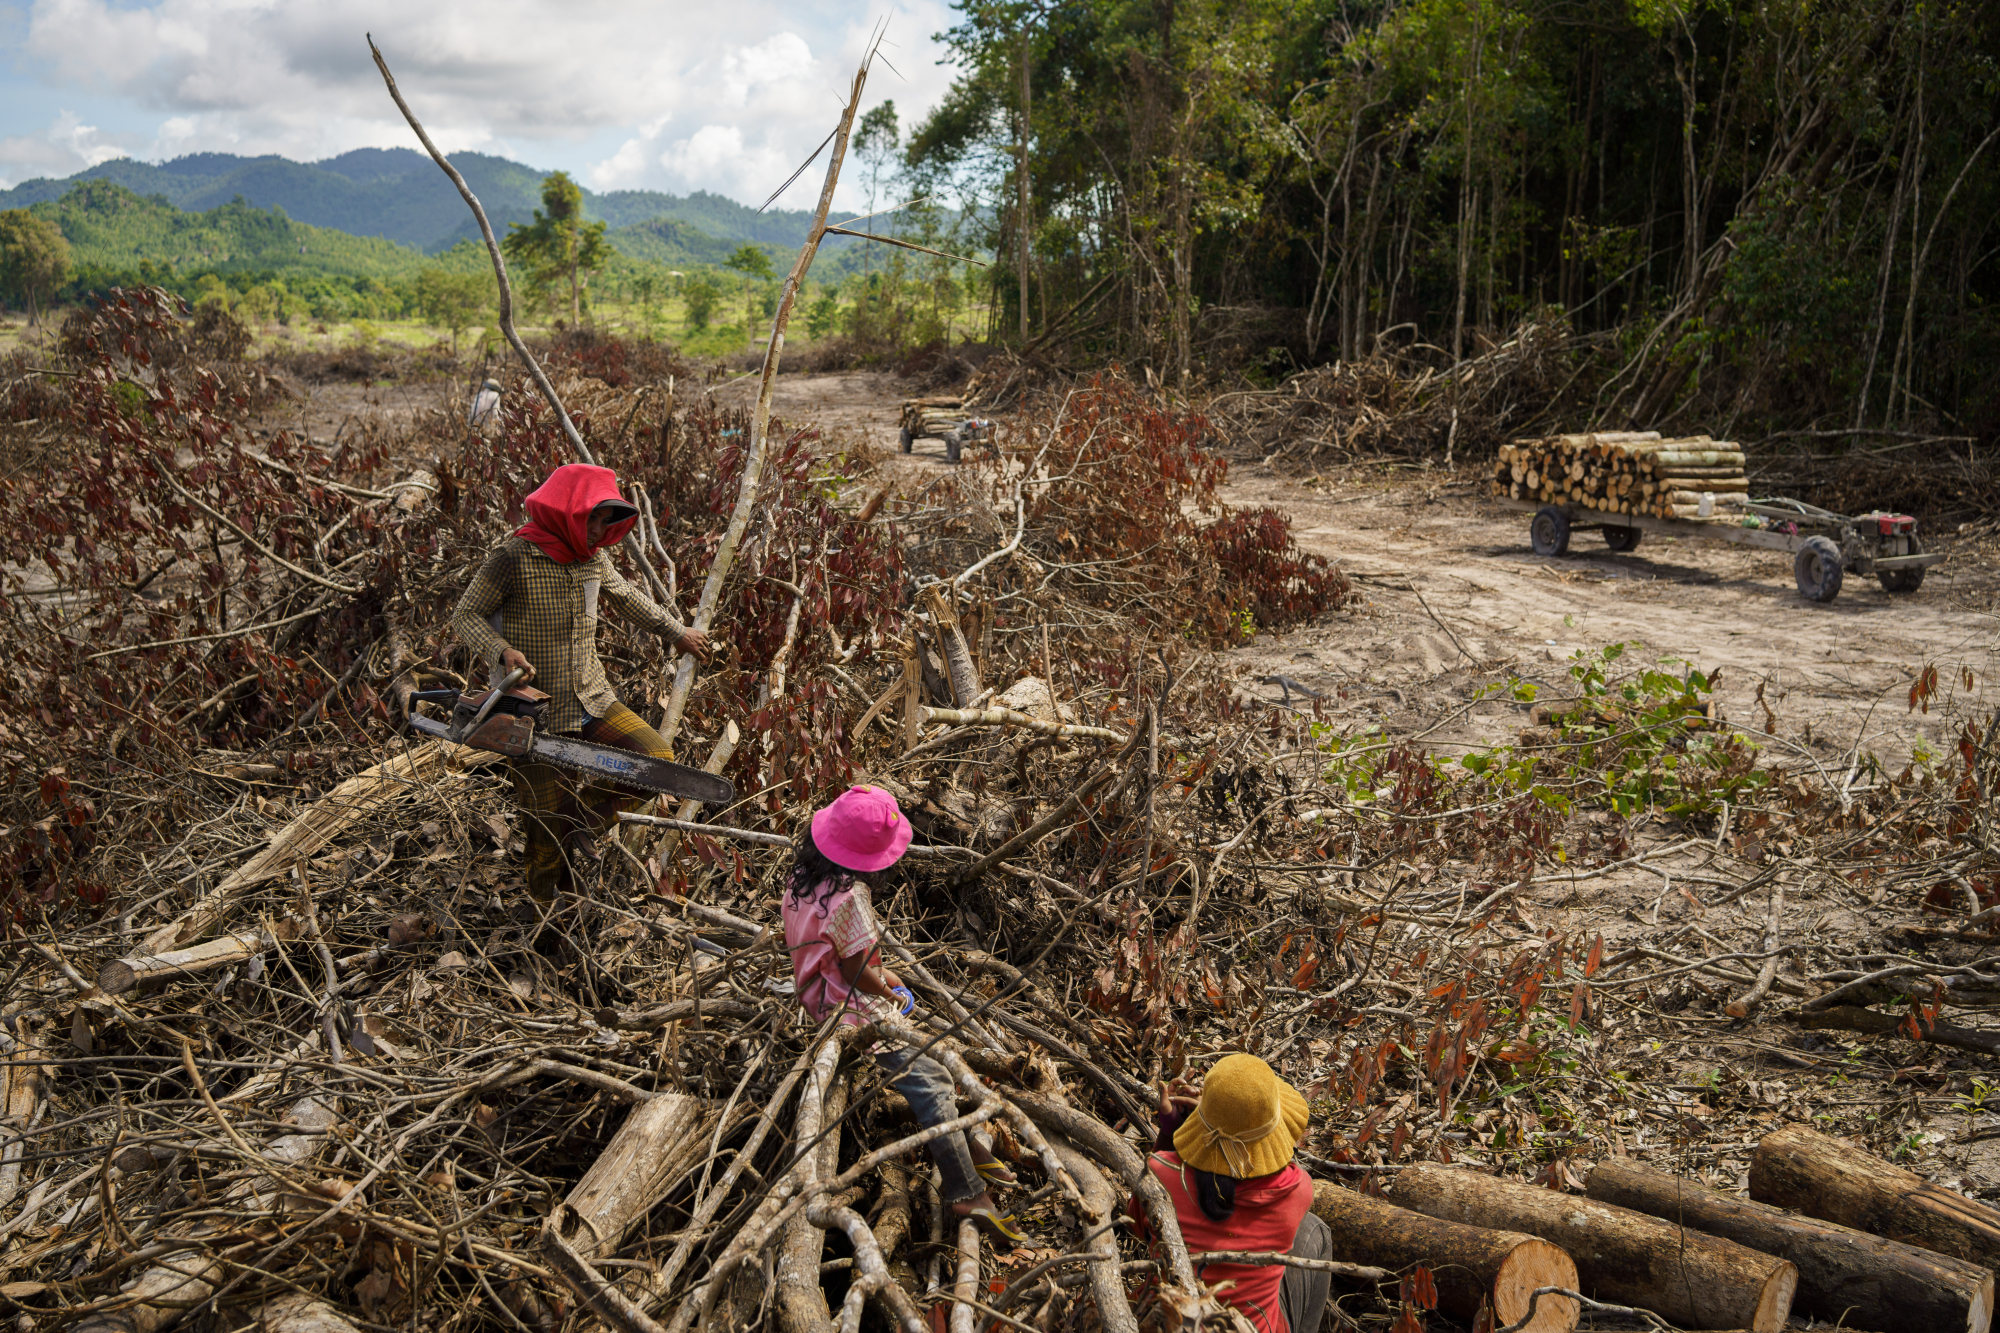 Villagers collect wood that was discarded by workers hired by Brigade 70 to clear the Metta forest. Photo: Thomas Cristofoletti / Ruom